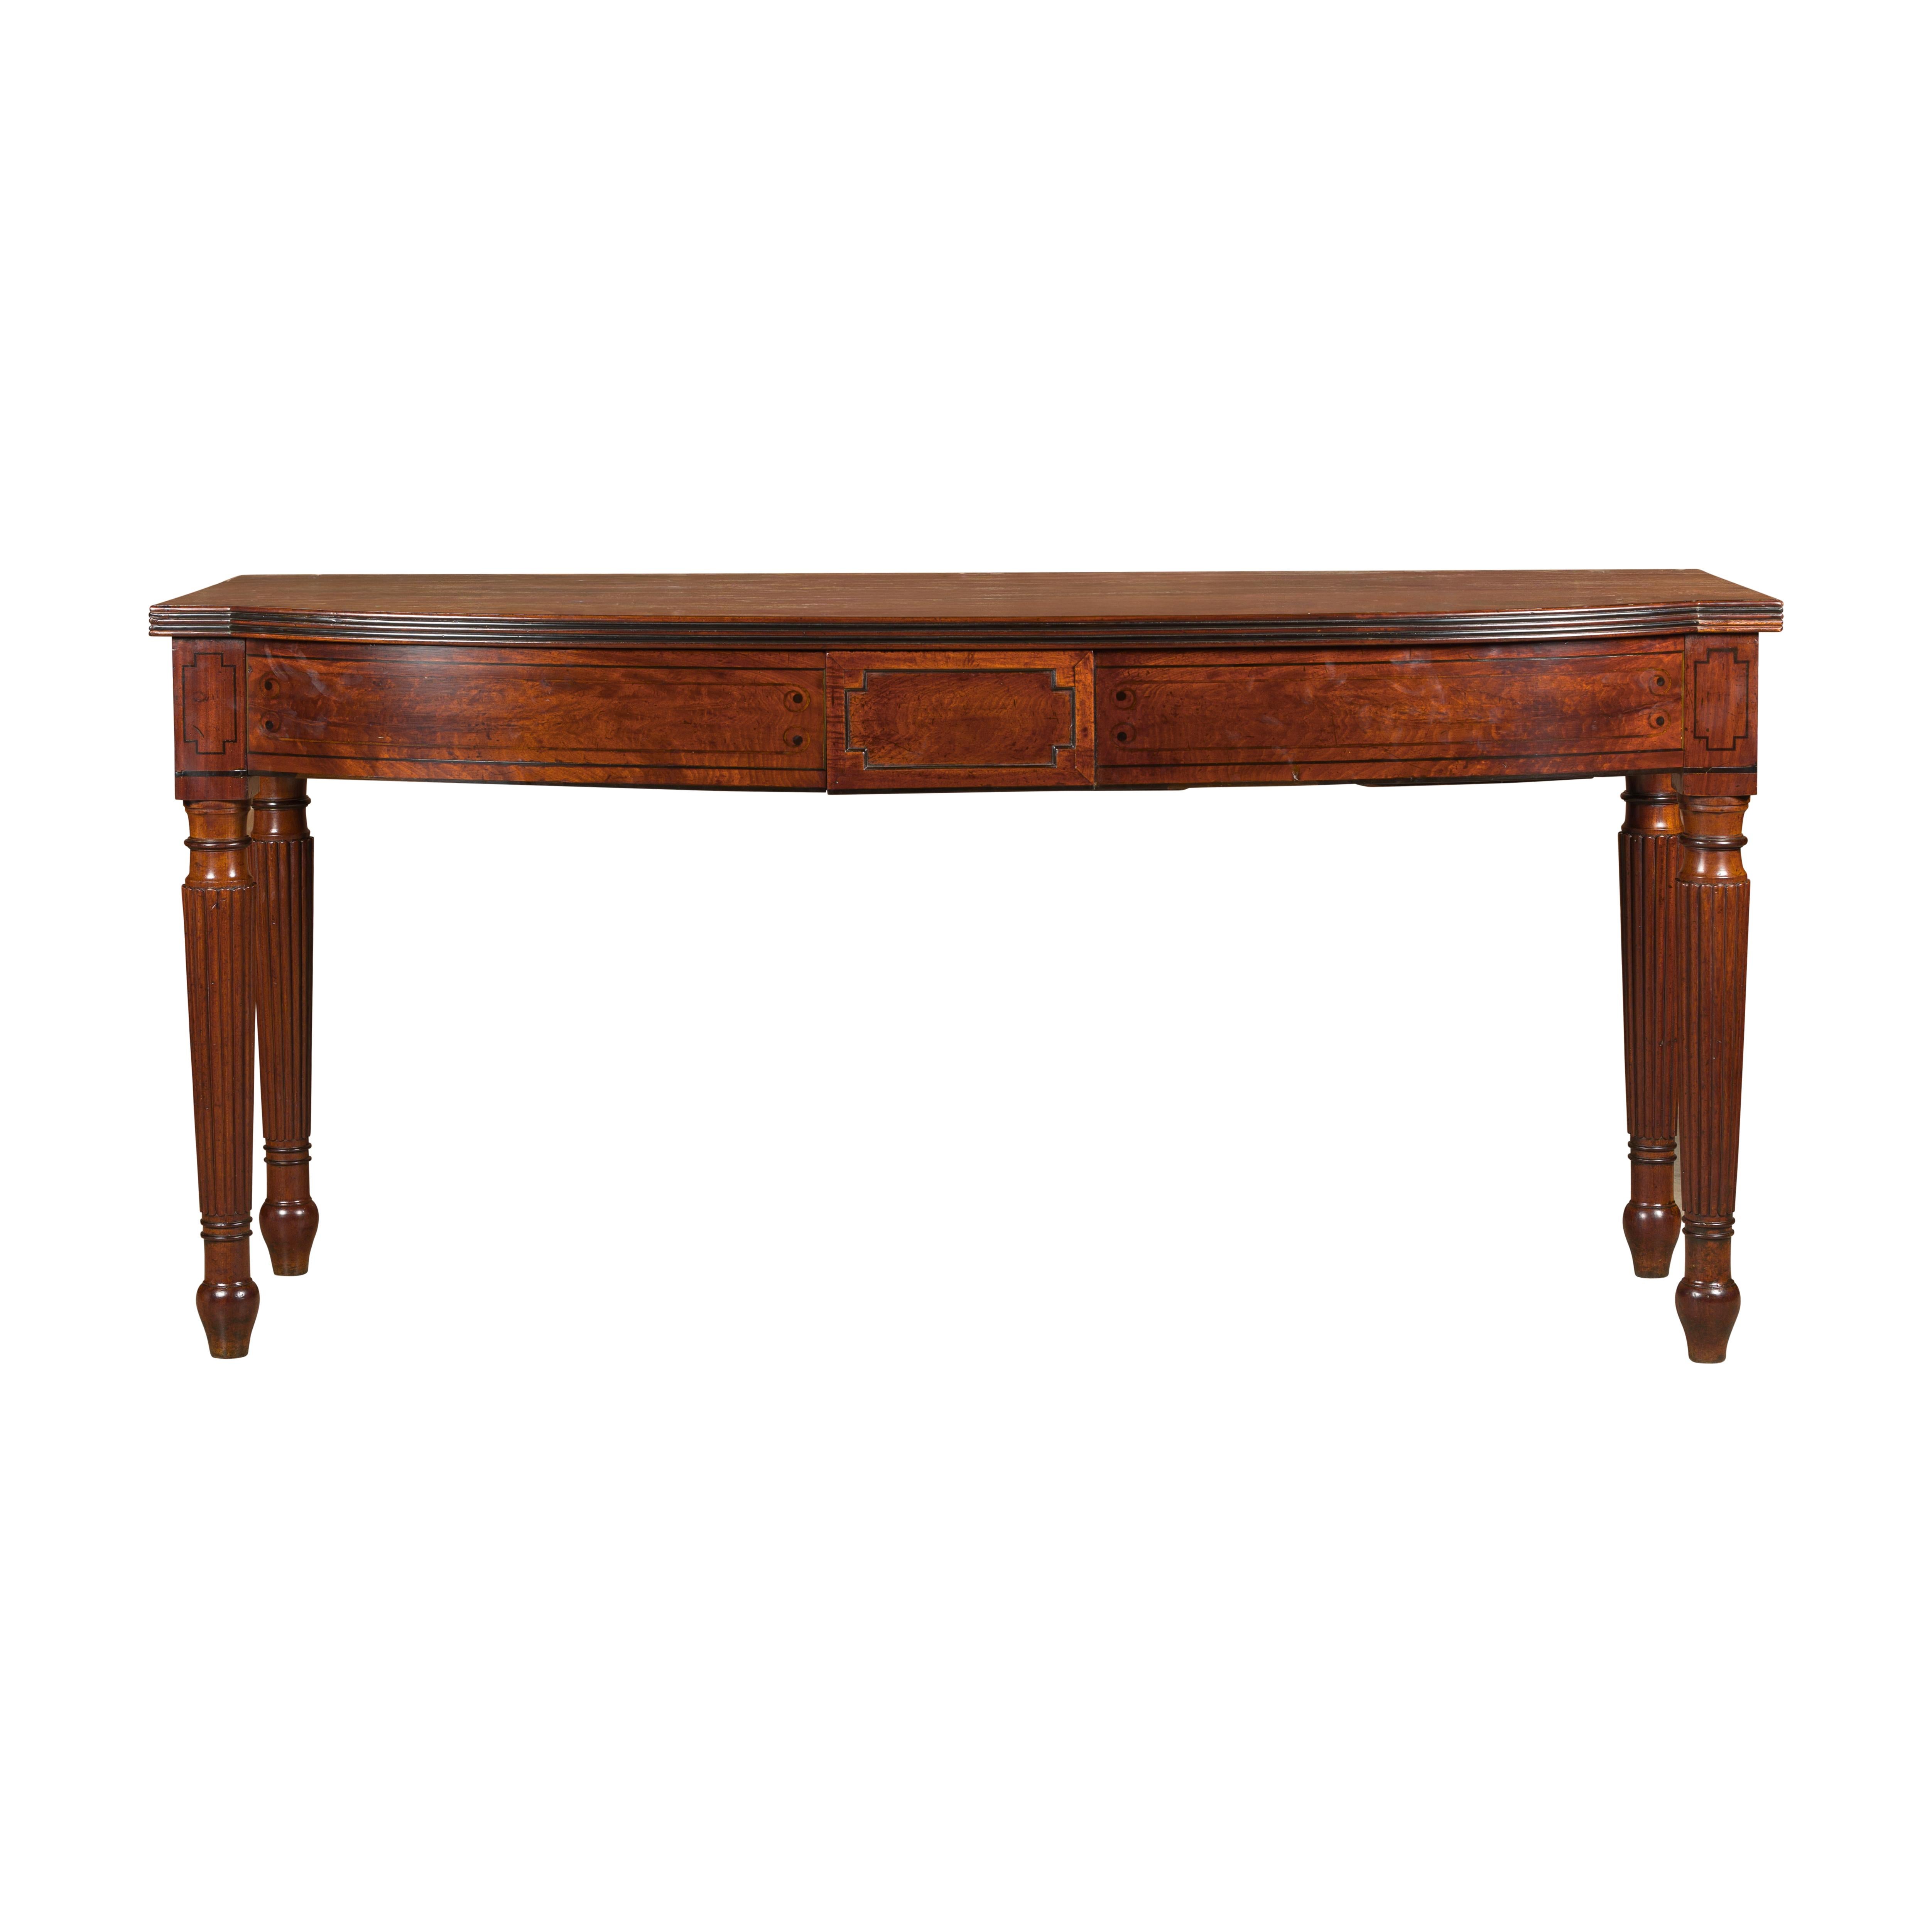 English Regency Early 19th Century Bow Front Console with Turned Reeded Legs 13